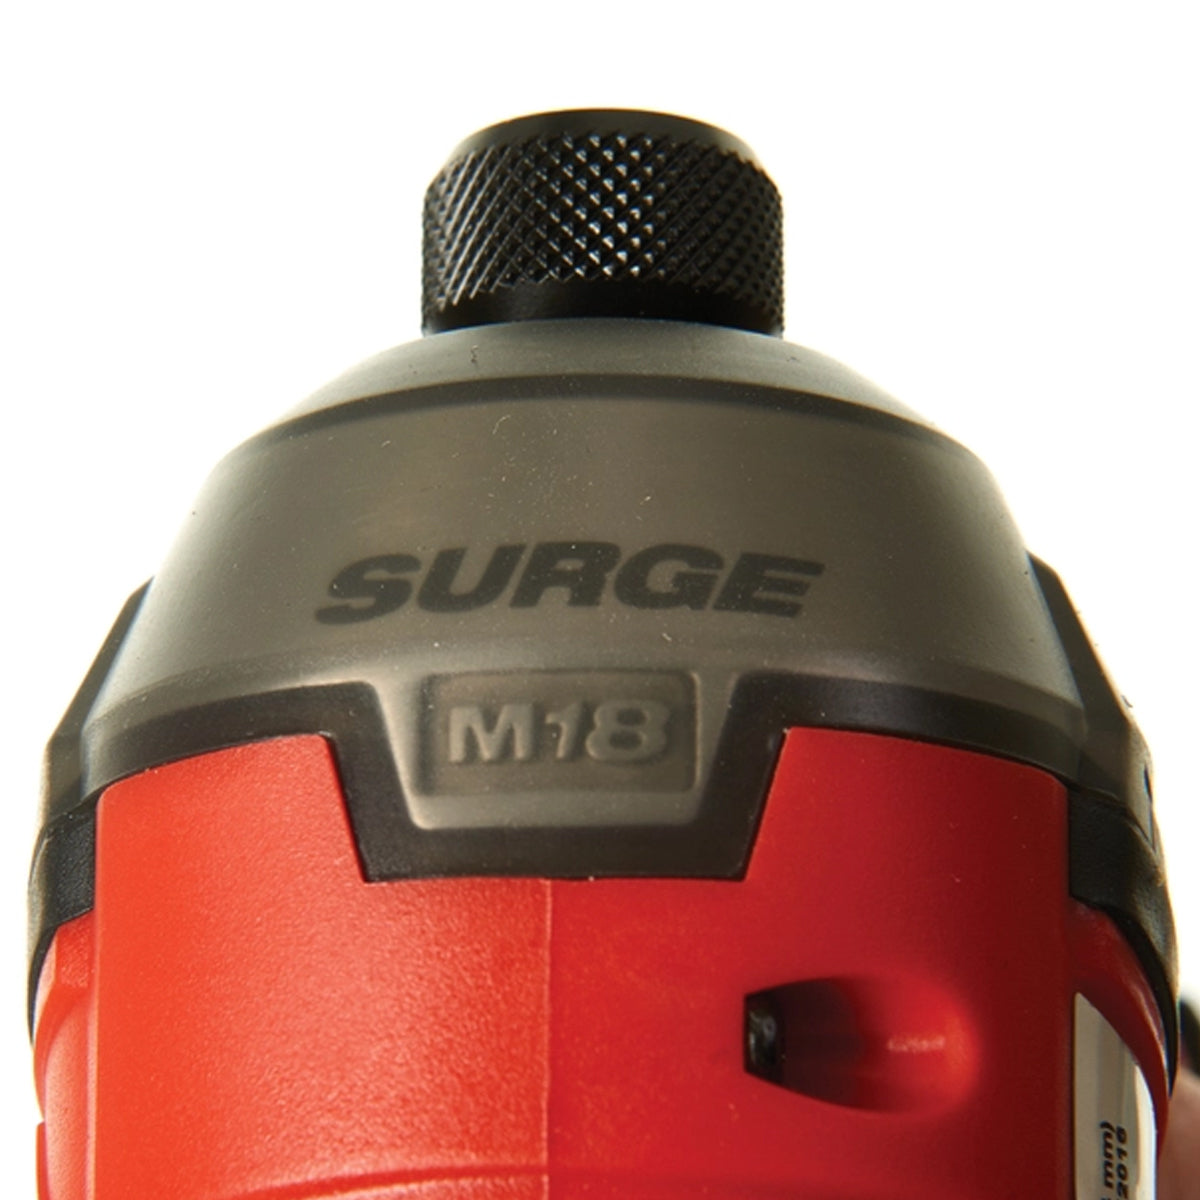 Milwaukee M18FQID-0 18V Brushless Hydraulic Impact Driver with 1 x 5.0Ah Battery Charger & Bag